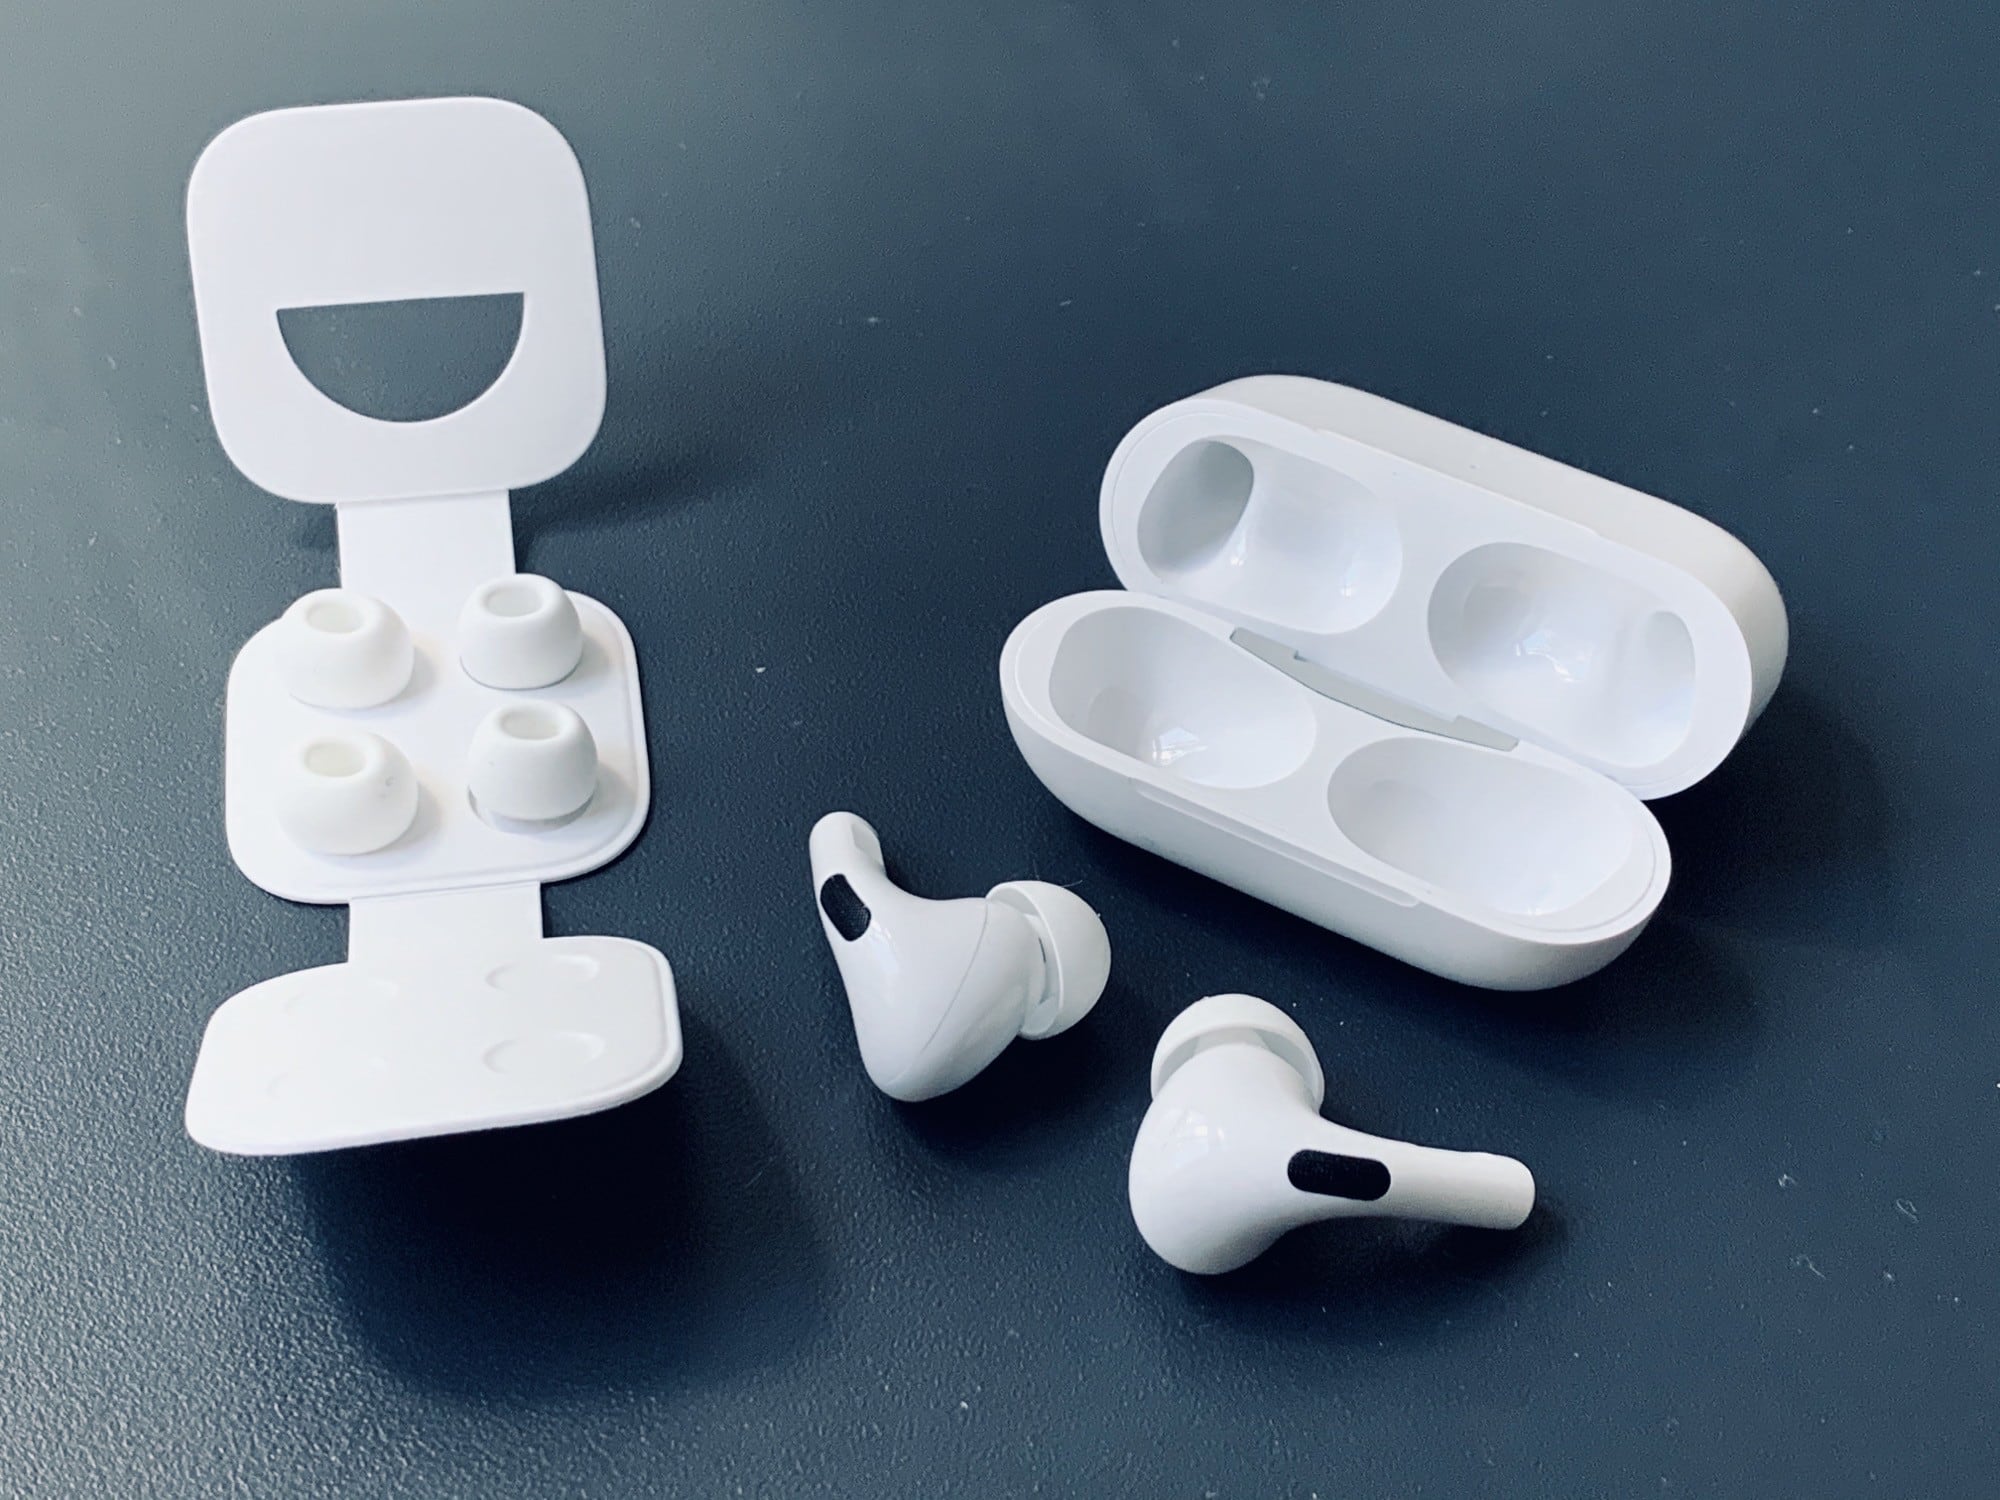 AirPods Pro review: These Apple earbuds are fandabbydosey | Cult 